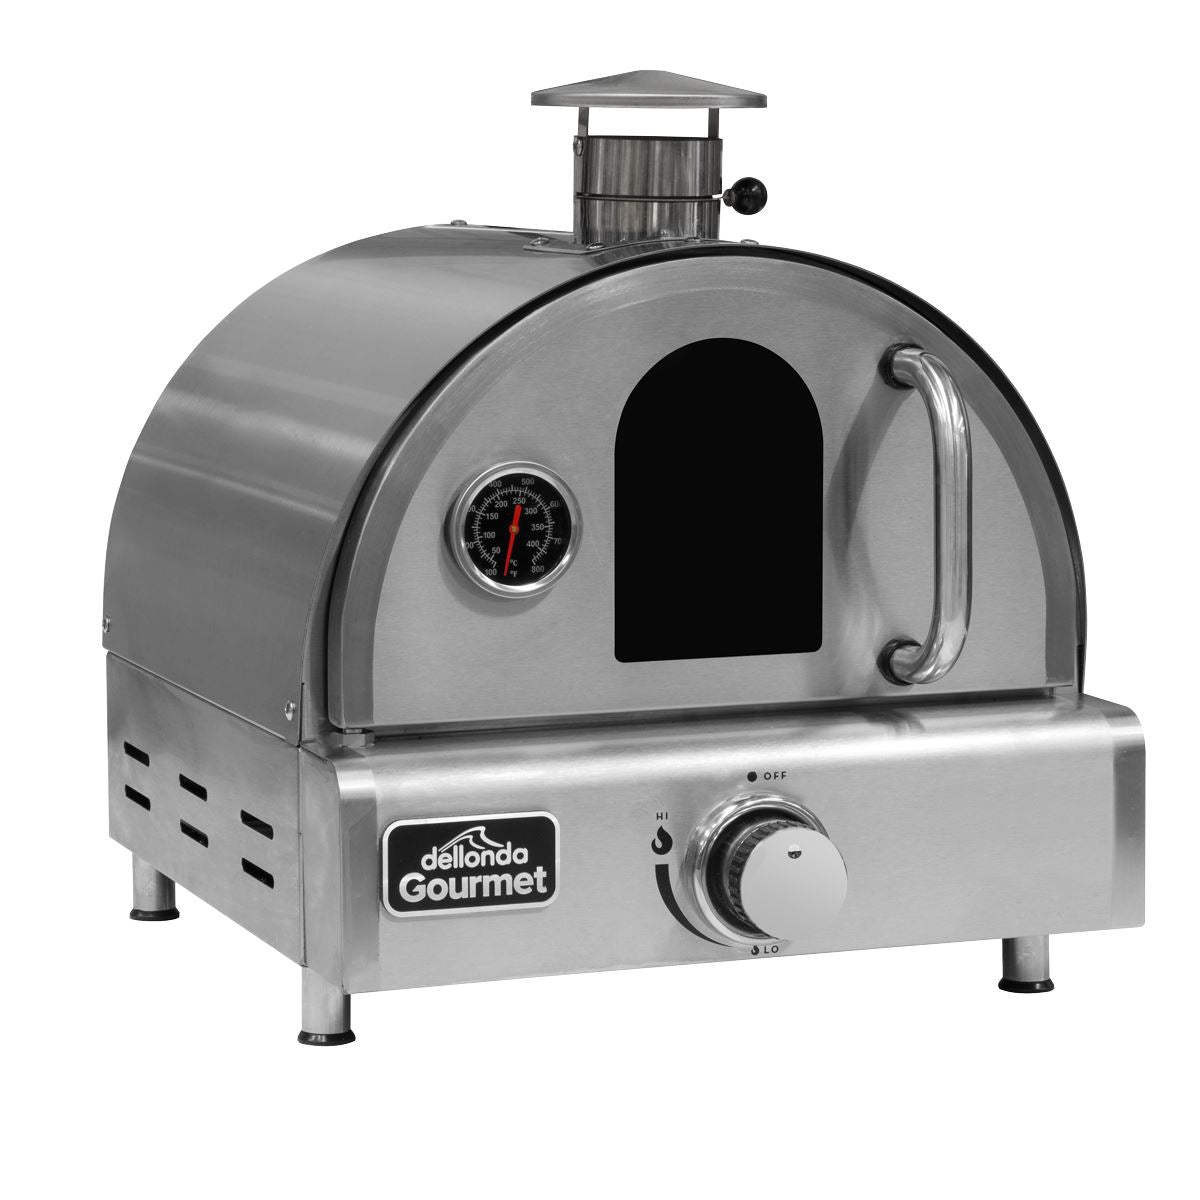 Dellonda Outdoor Table Top Gas Powered Pizza Oven with Temperature Display - DG104